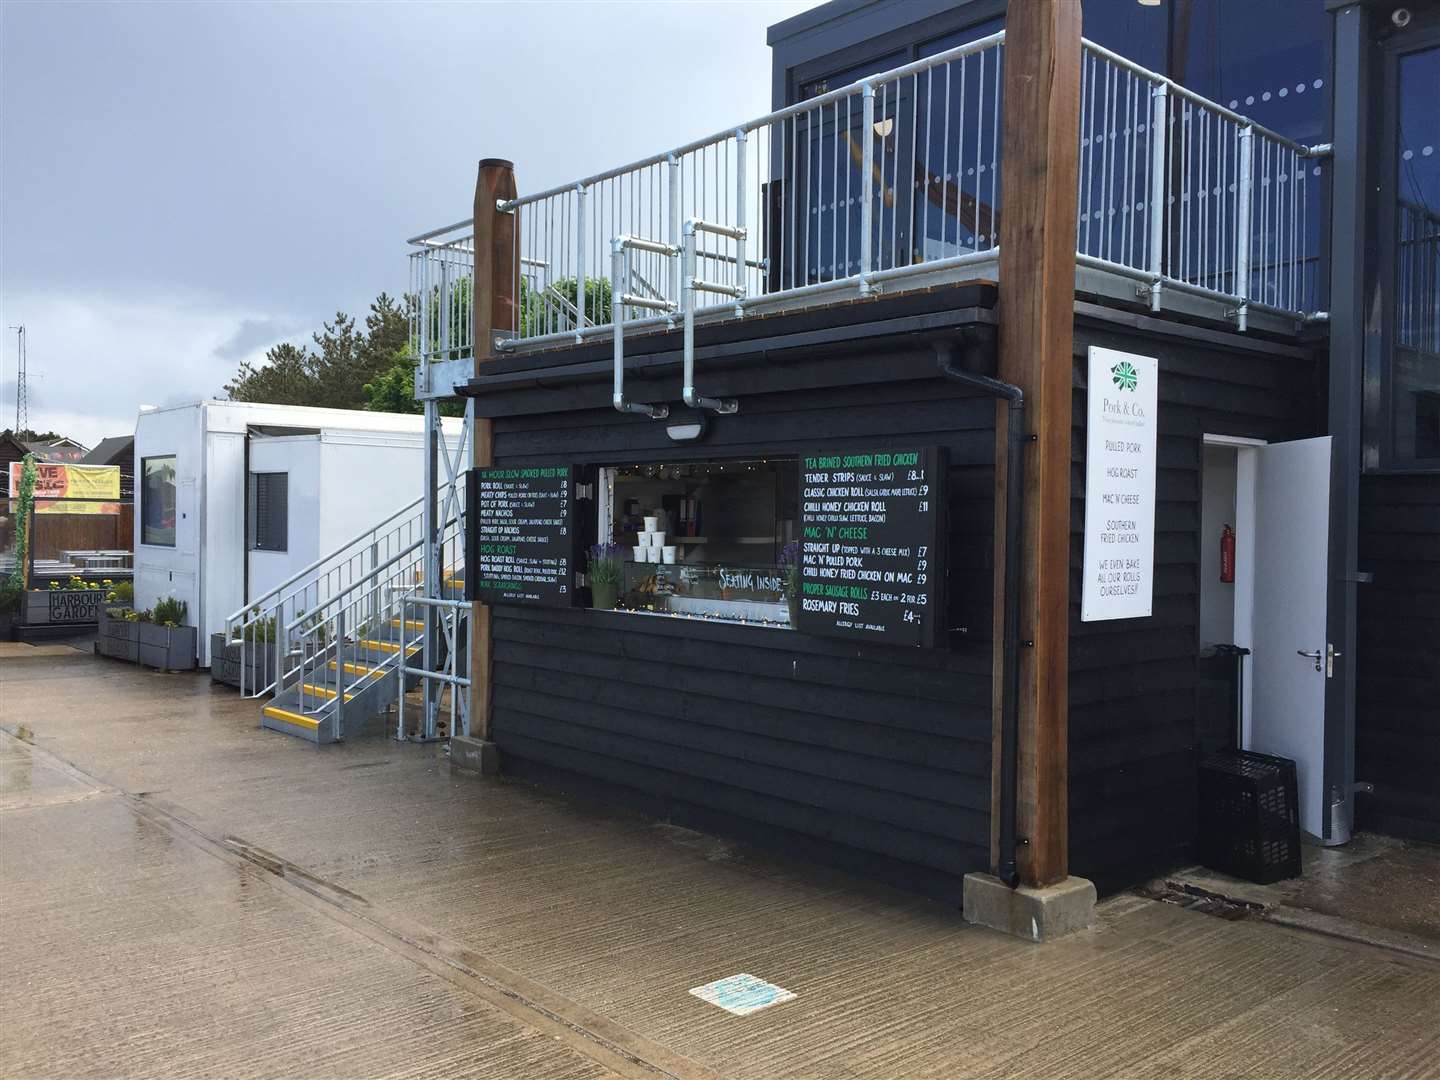 Pork & Co at the South Quay Shed in Whitstable harbour